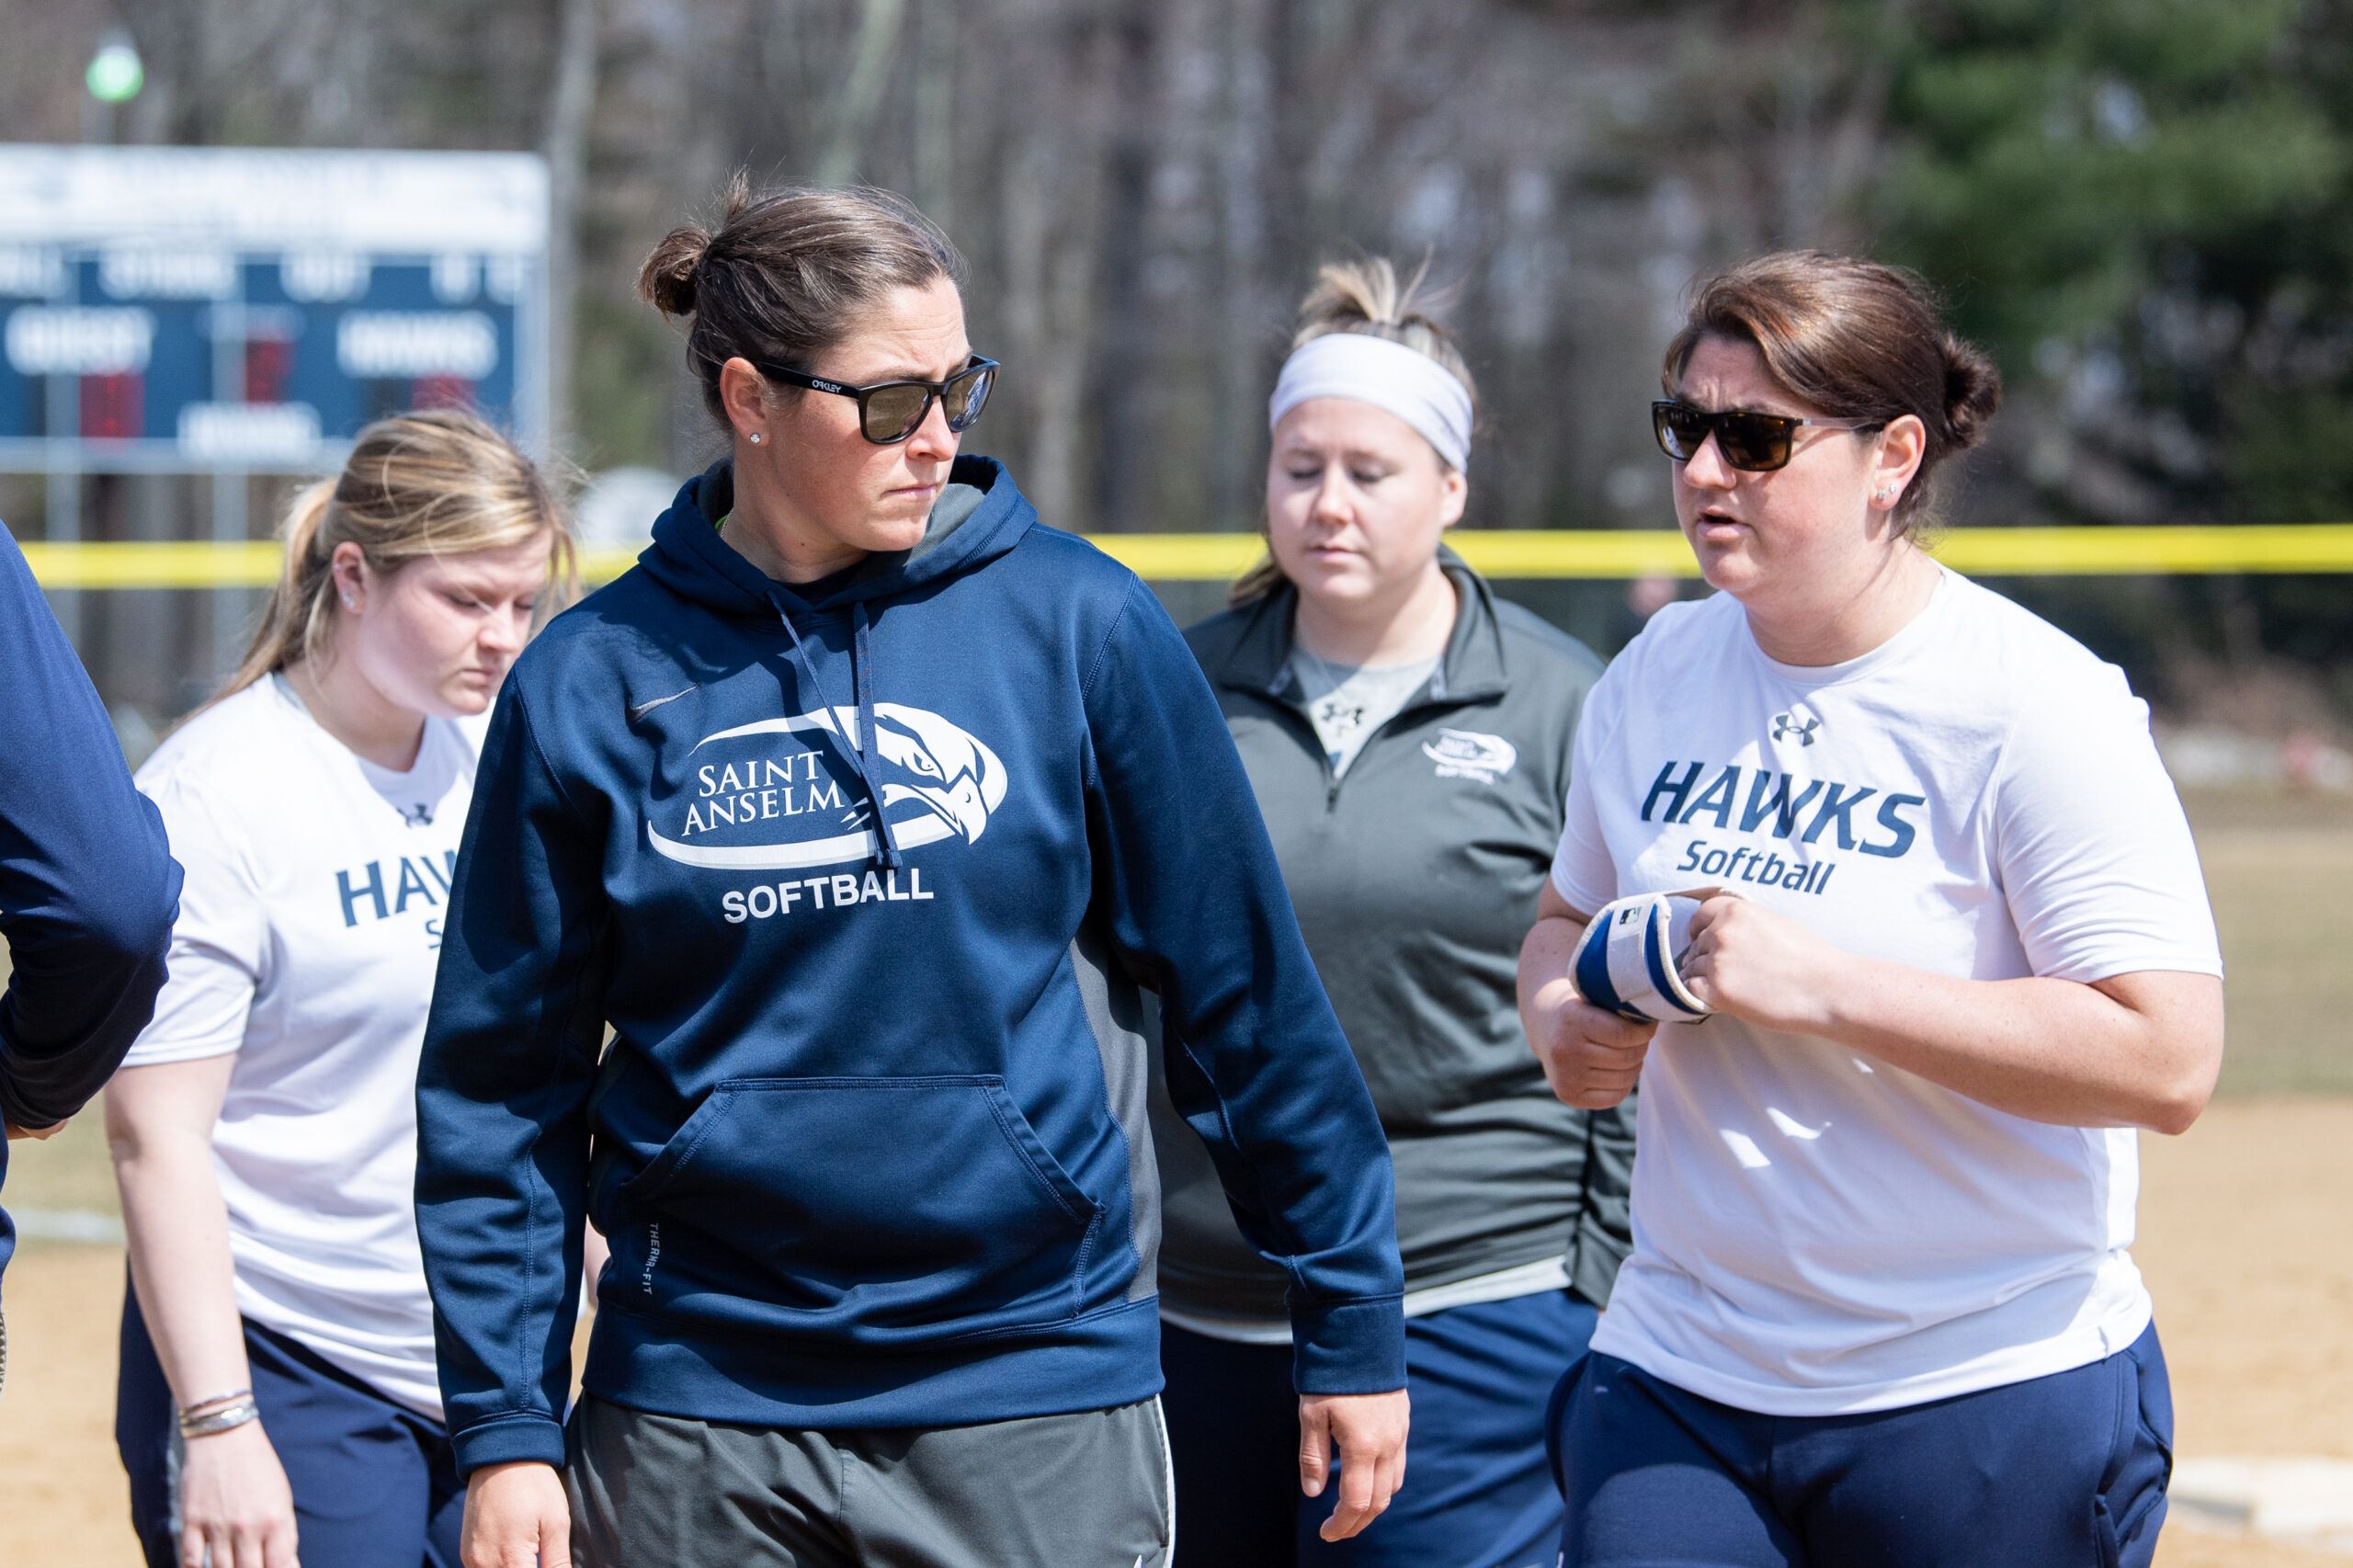 Saint Anselm now a Division II — Justin's World of Softball